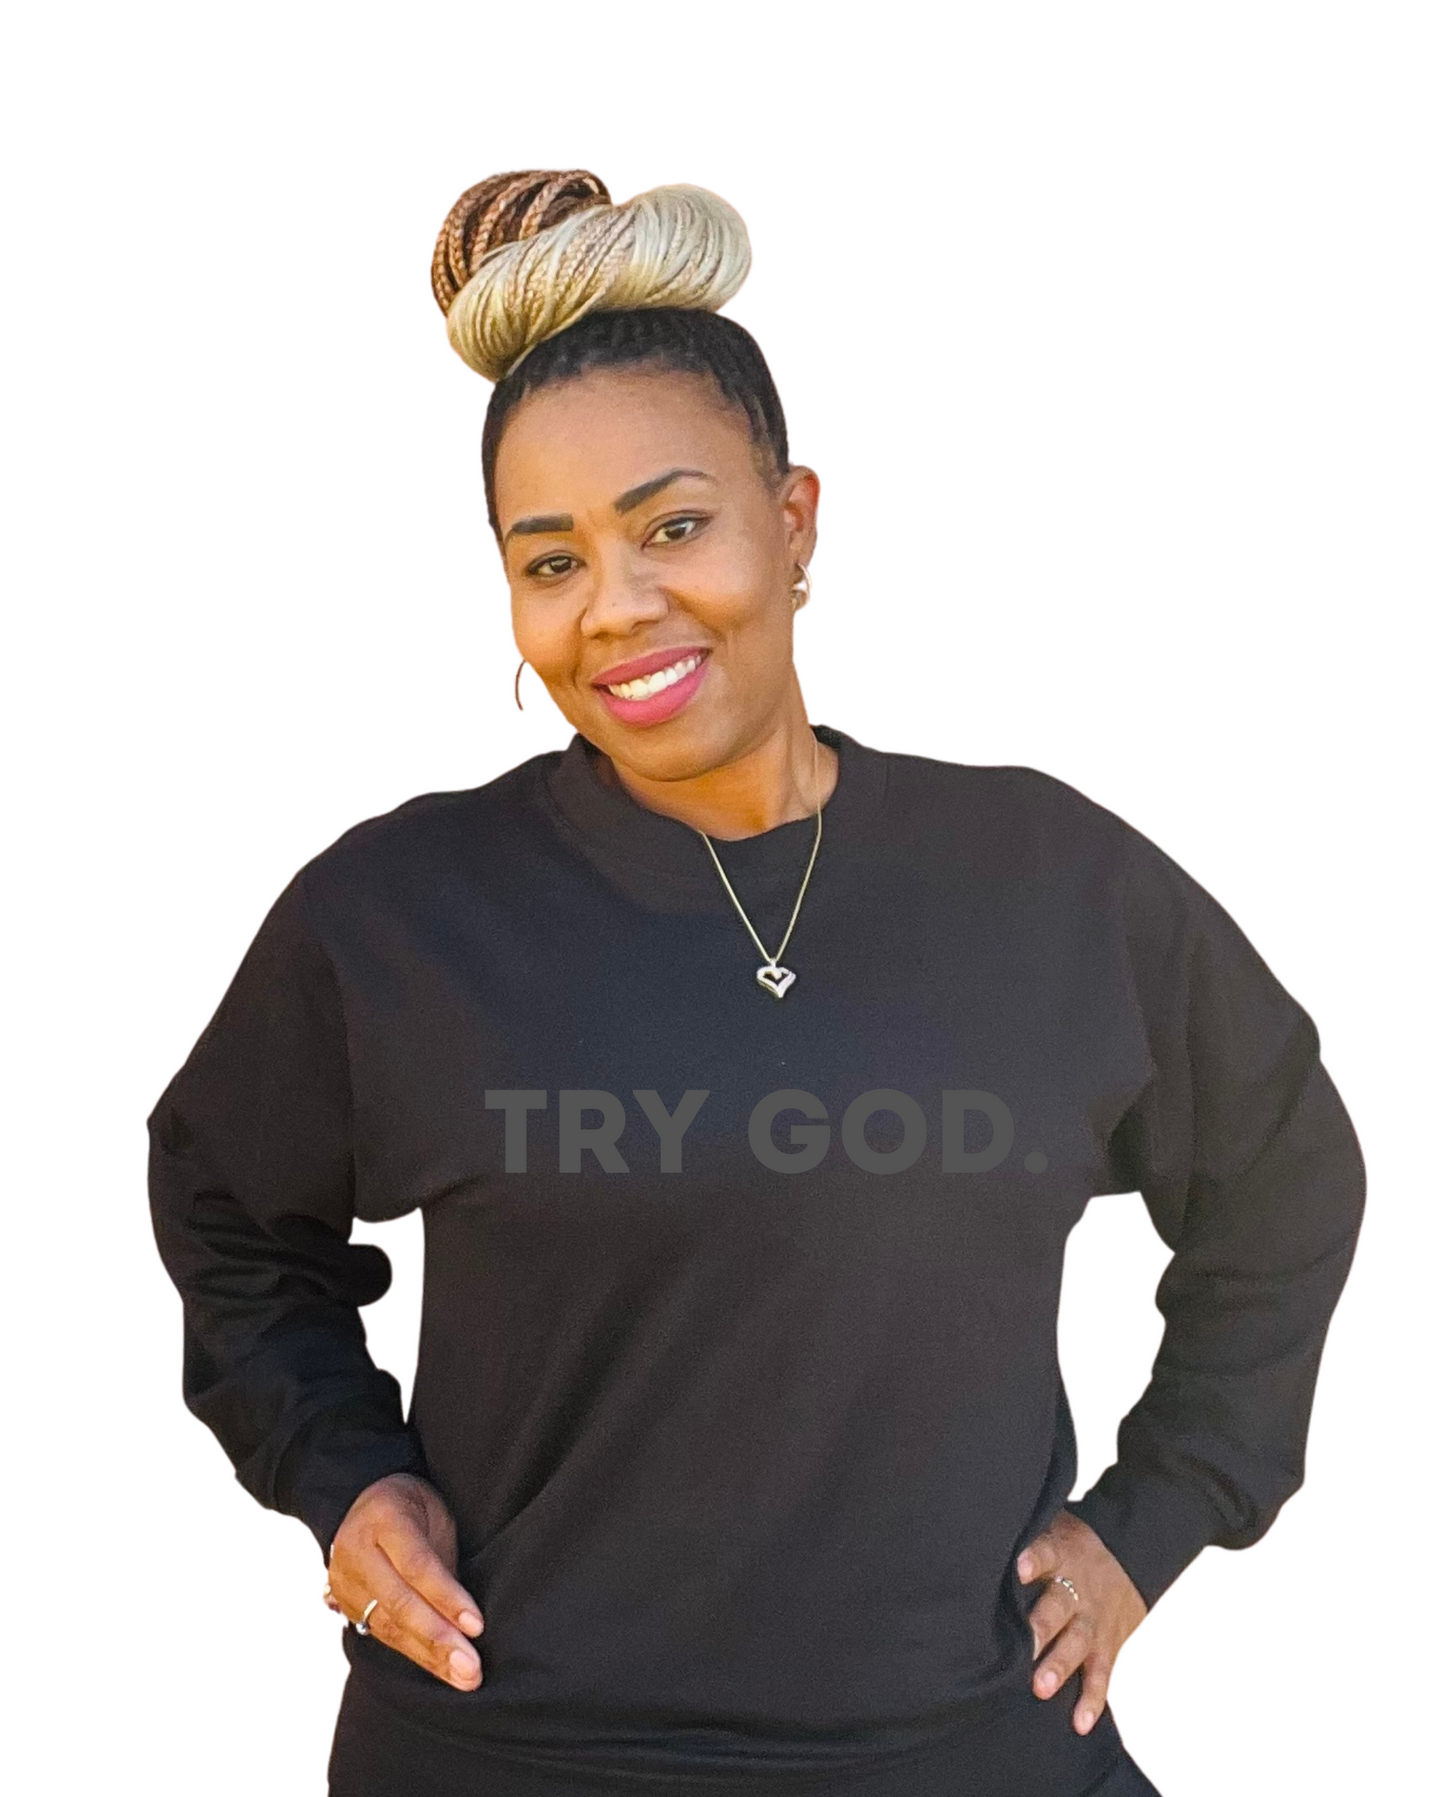 TRY GOD SWEATER